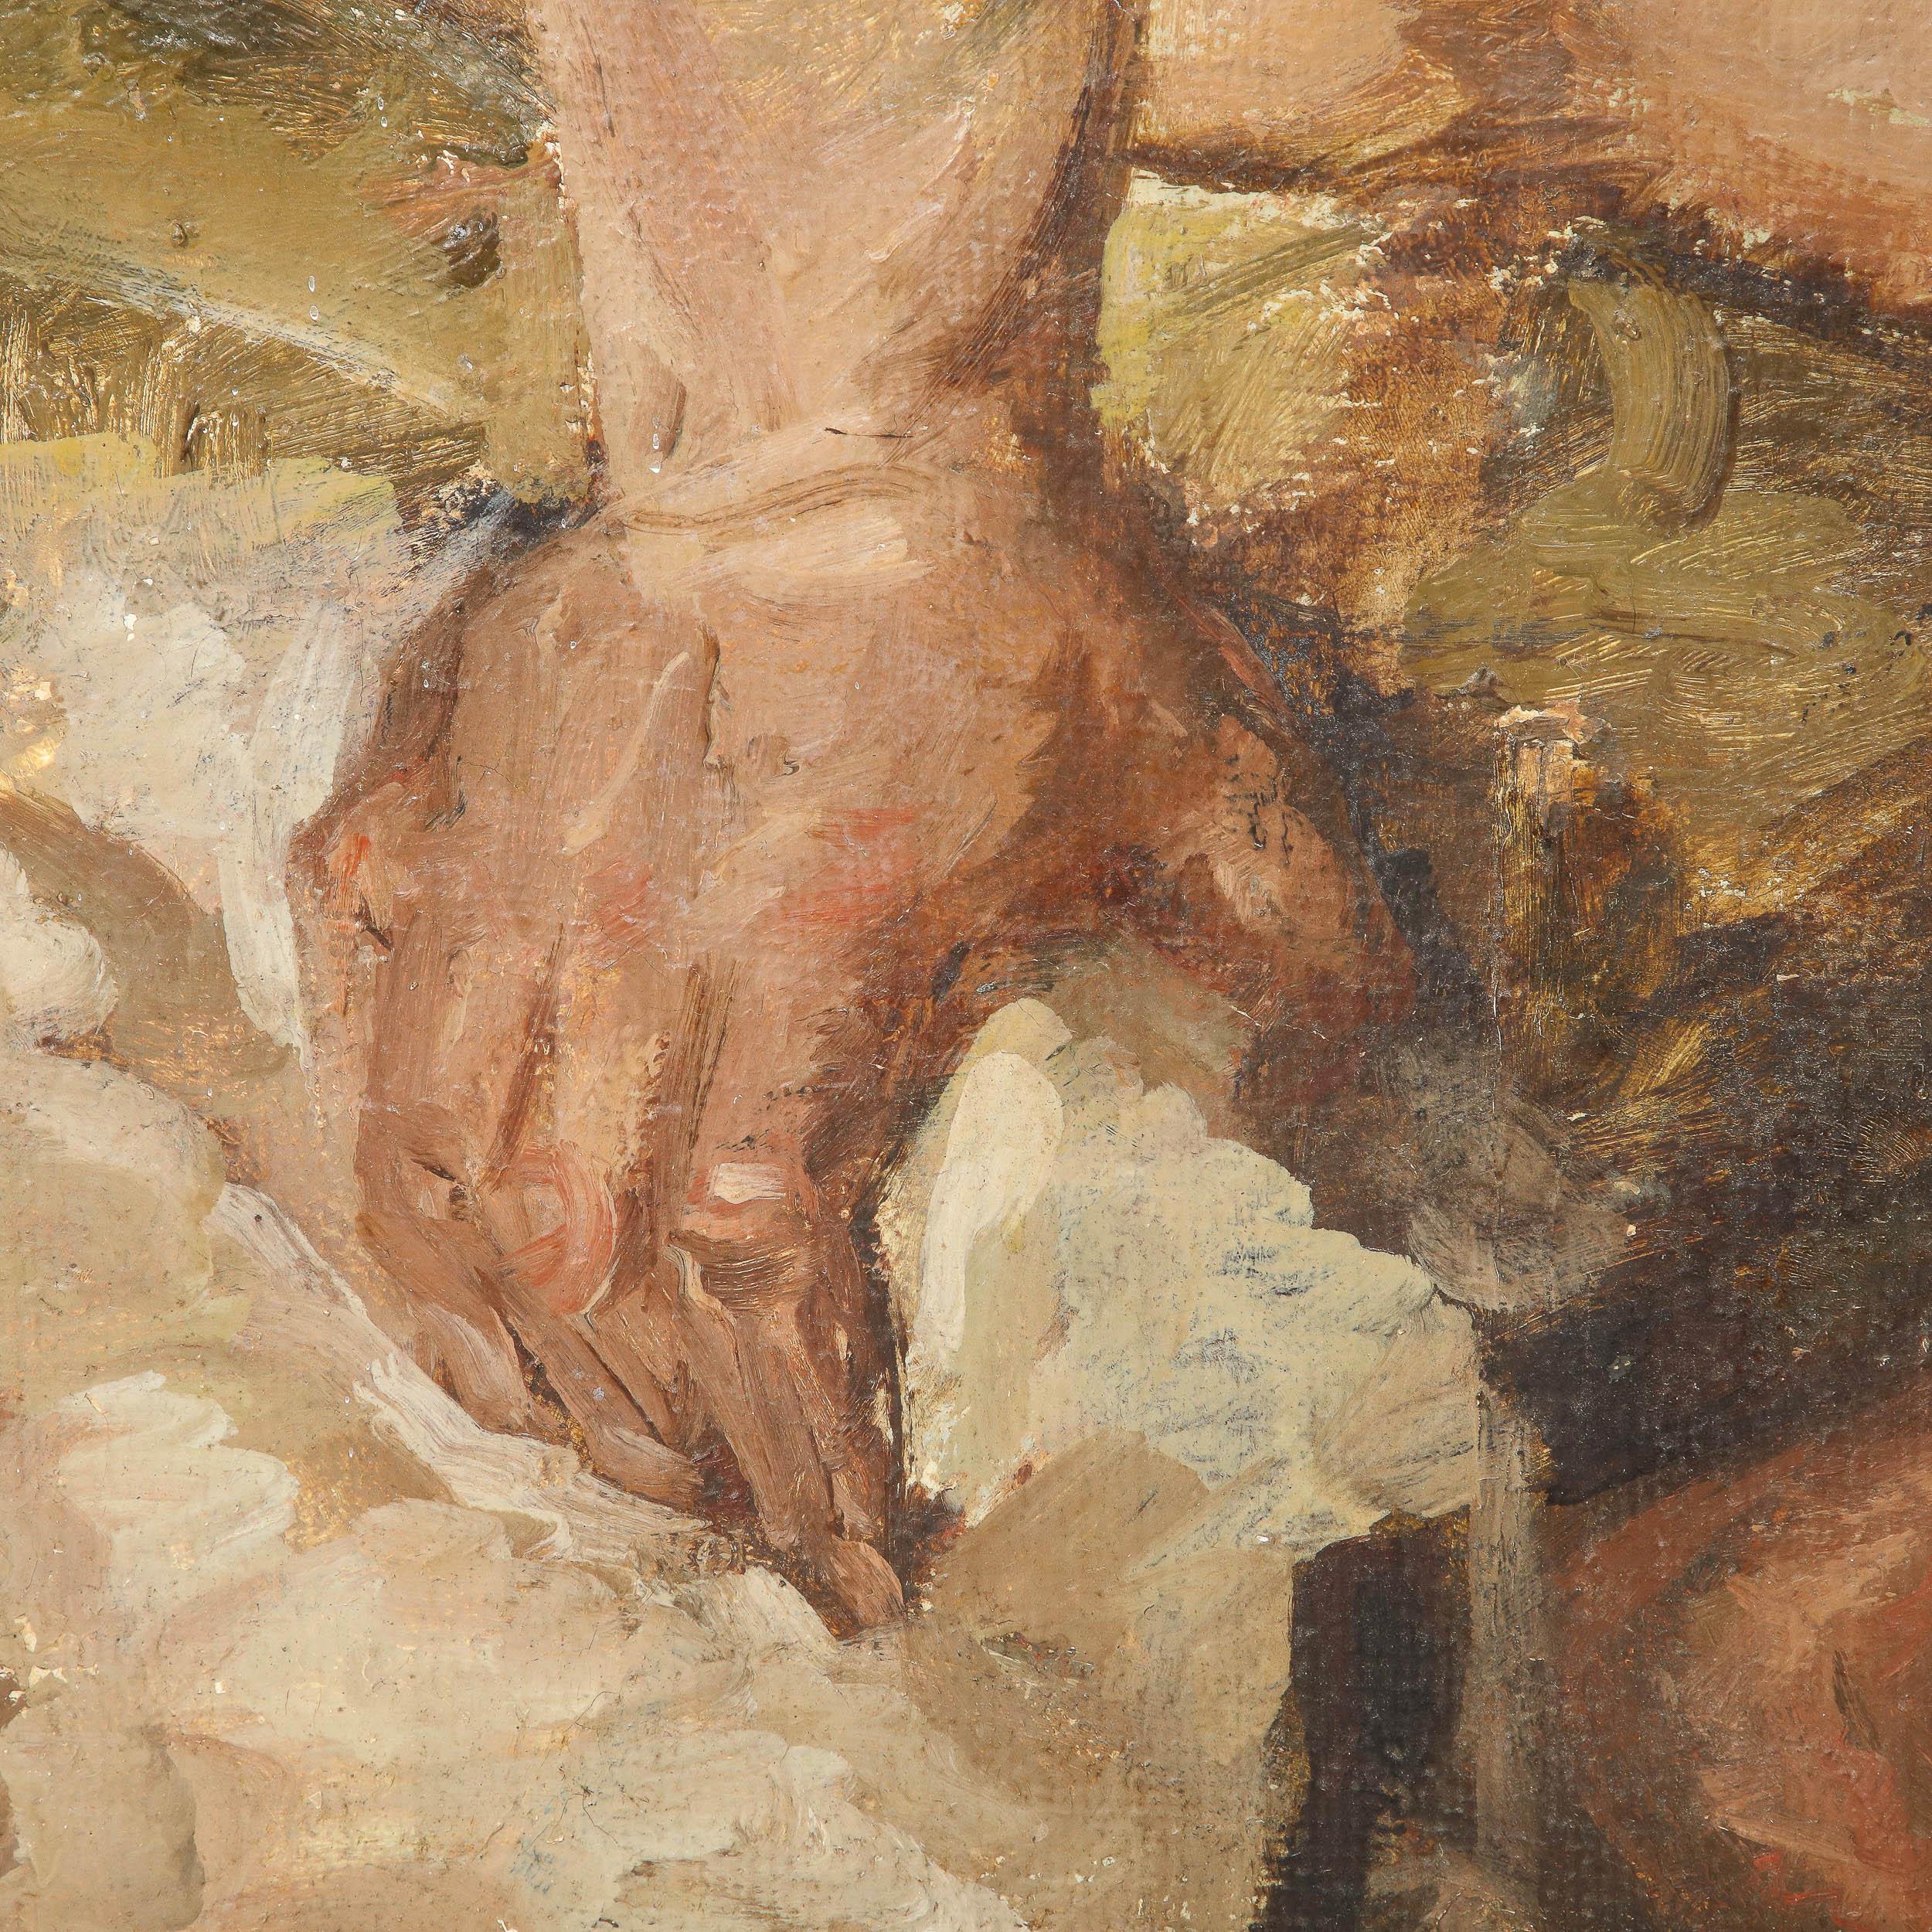 Romanticist Oil on Burlap Painting of a Nude Male Figure Bathing in a River  For Sale 3